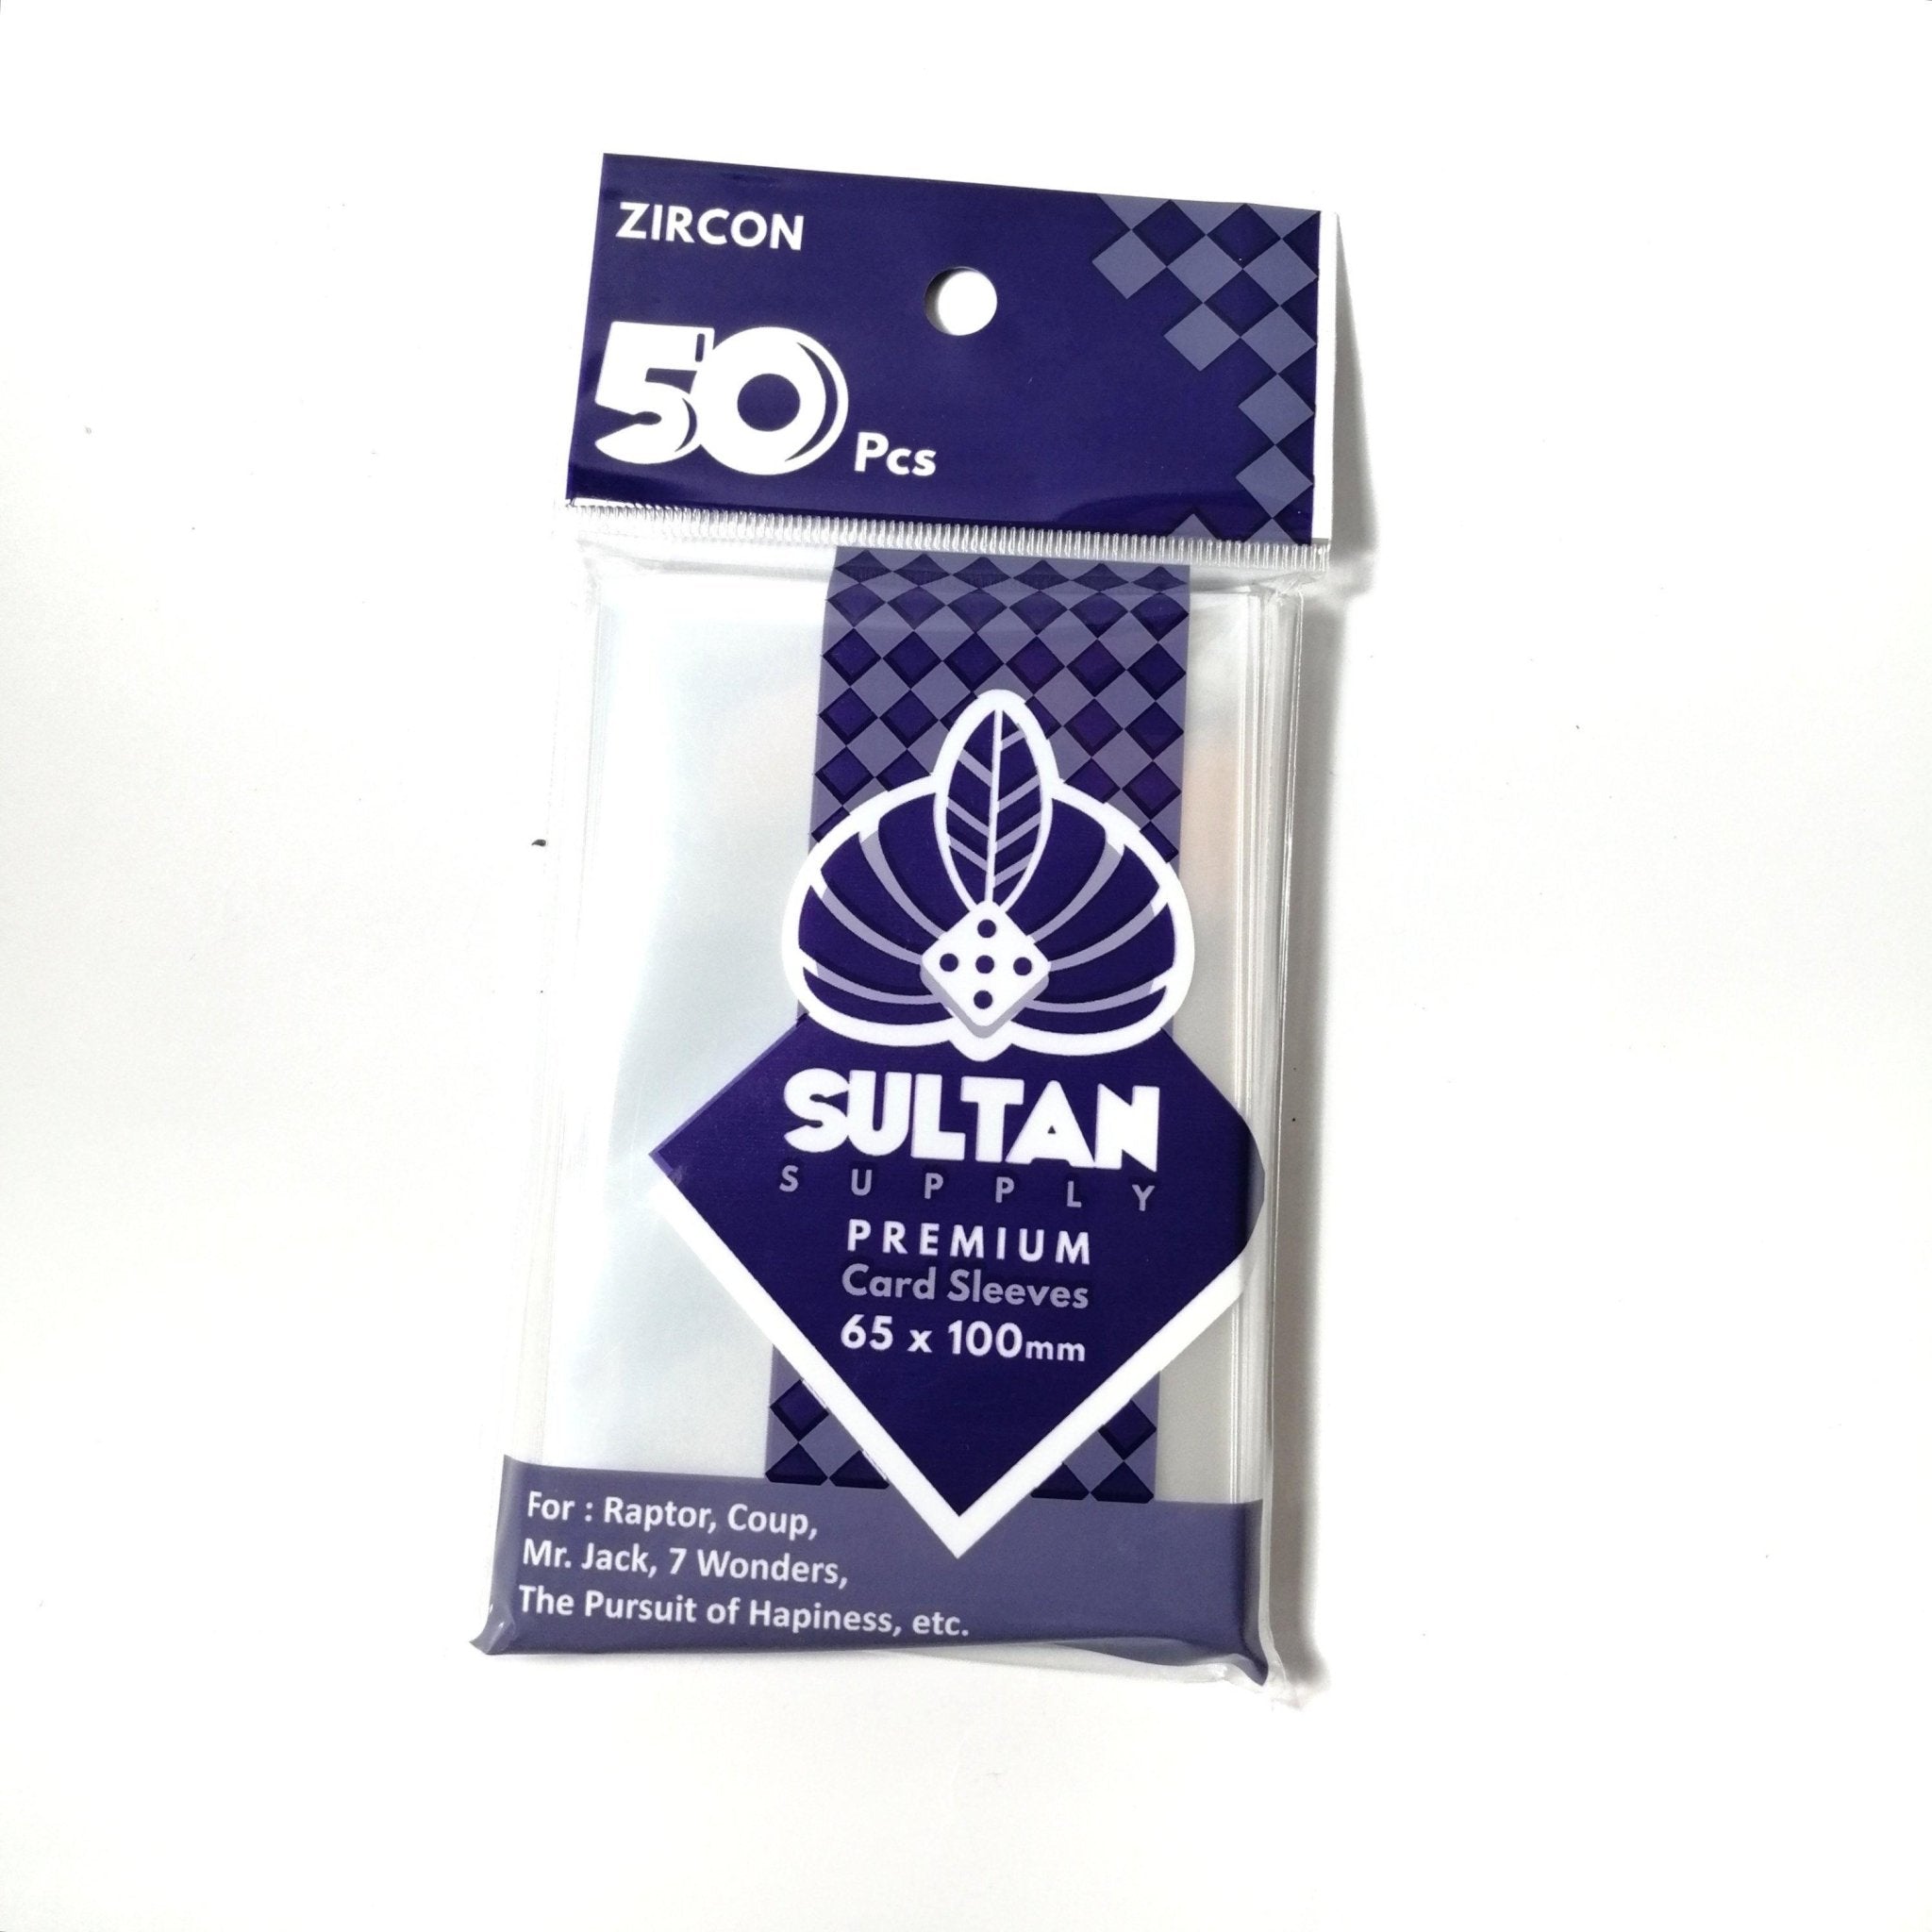 Sultan Supply Premium Card Sleeves: 65 x 100 mm Zircon (90 microns) - Gaming Library